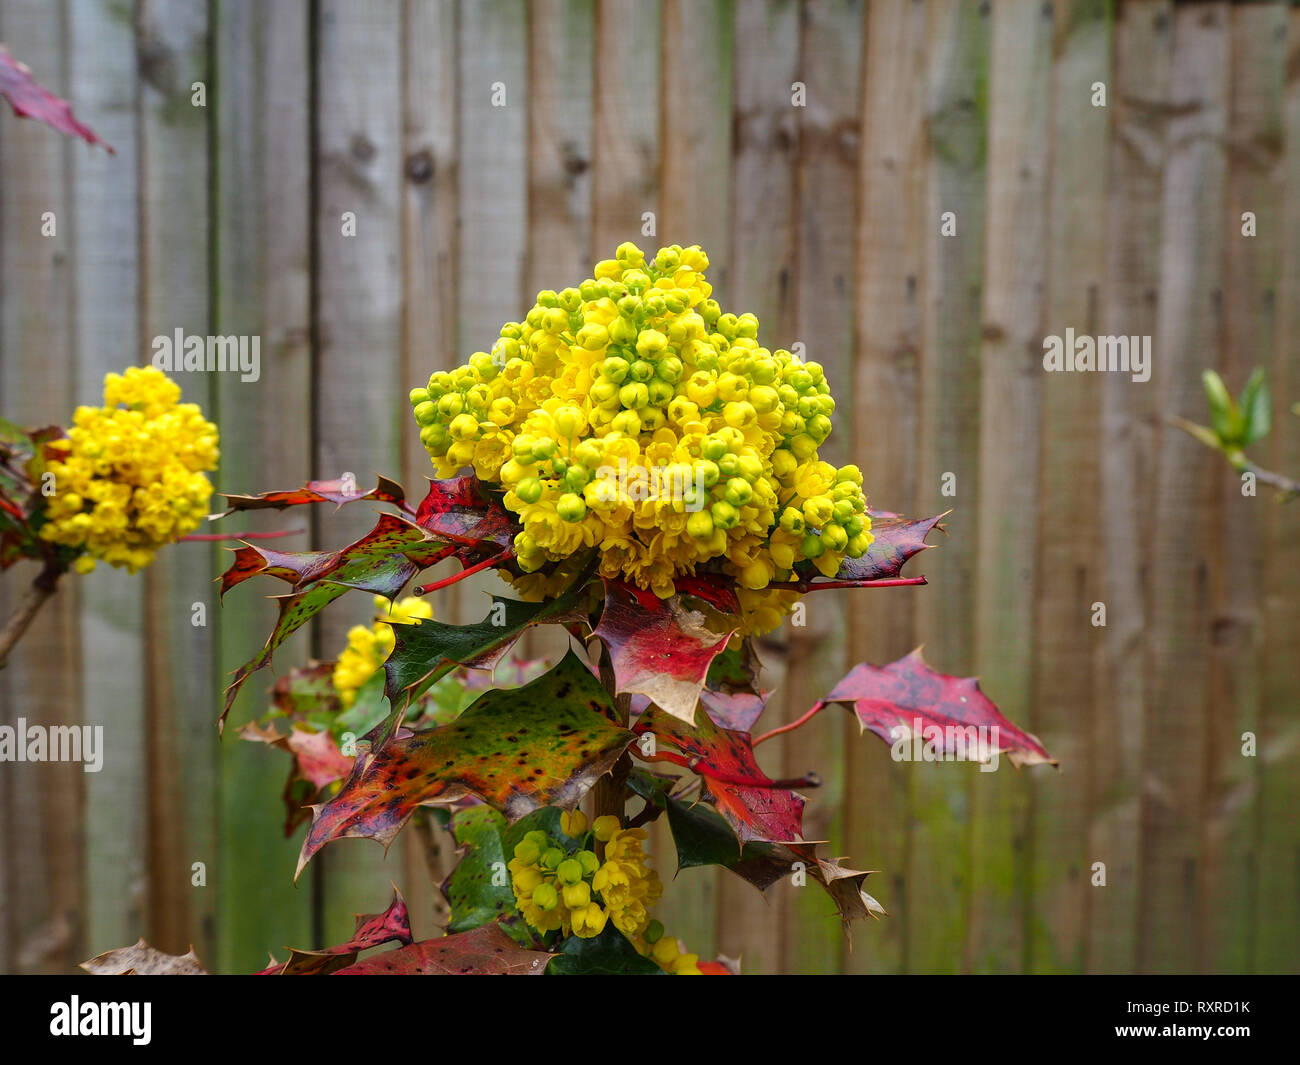 Yellow and green flowers and buds on a holly bush growing in front of an old wooden fence Stock Photo